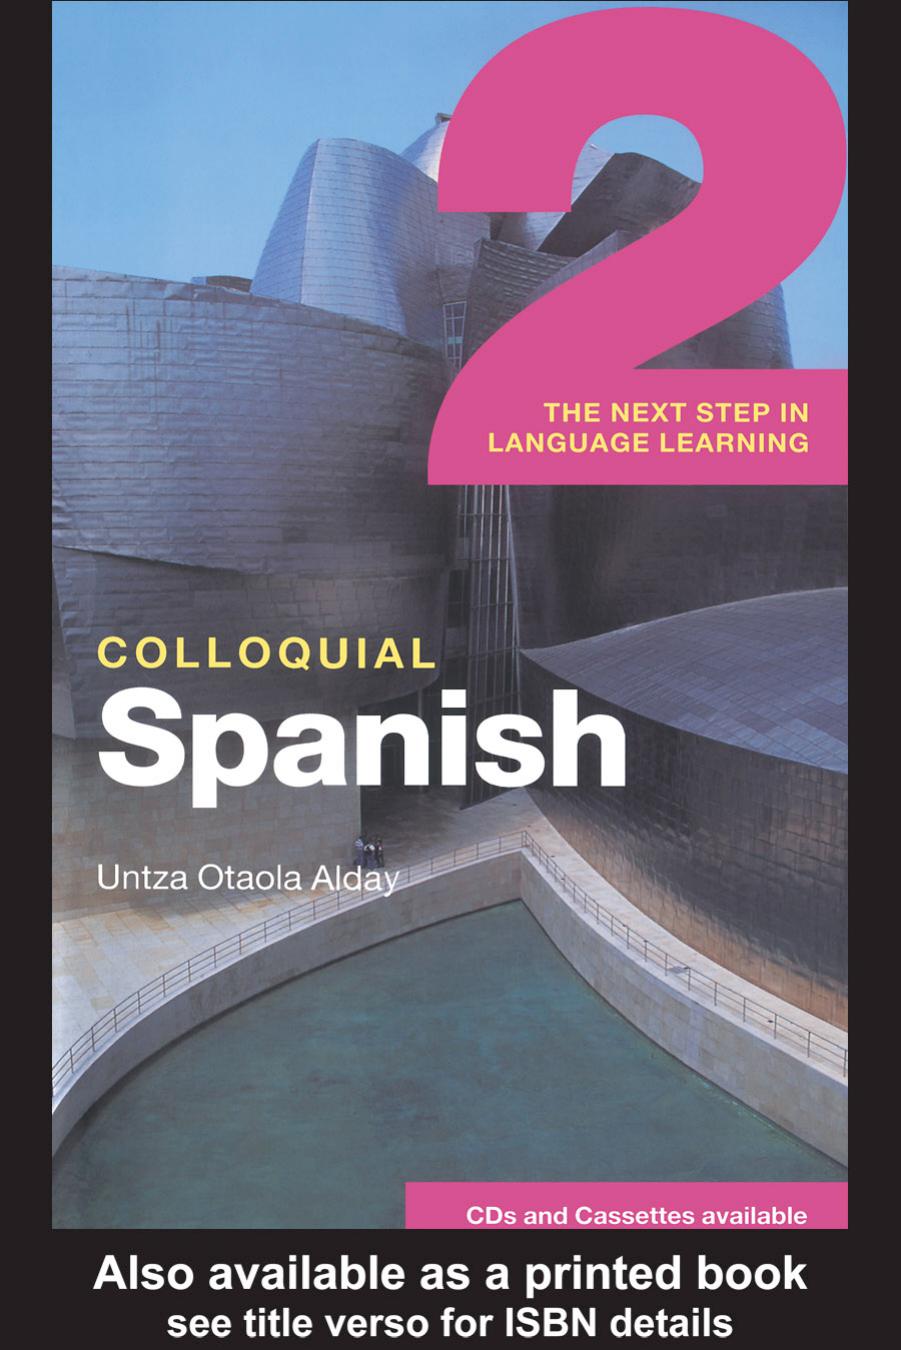 2 Colloquial Spanish: The Next Step in Language Learning by Untza Otaola Alday